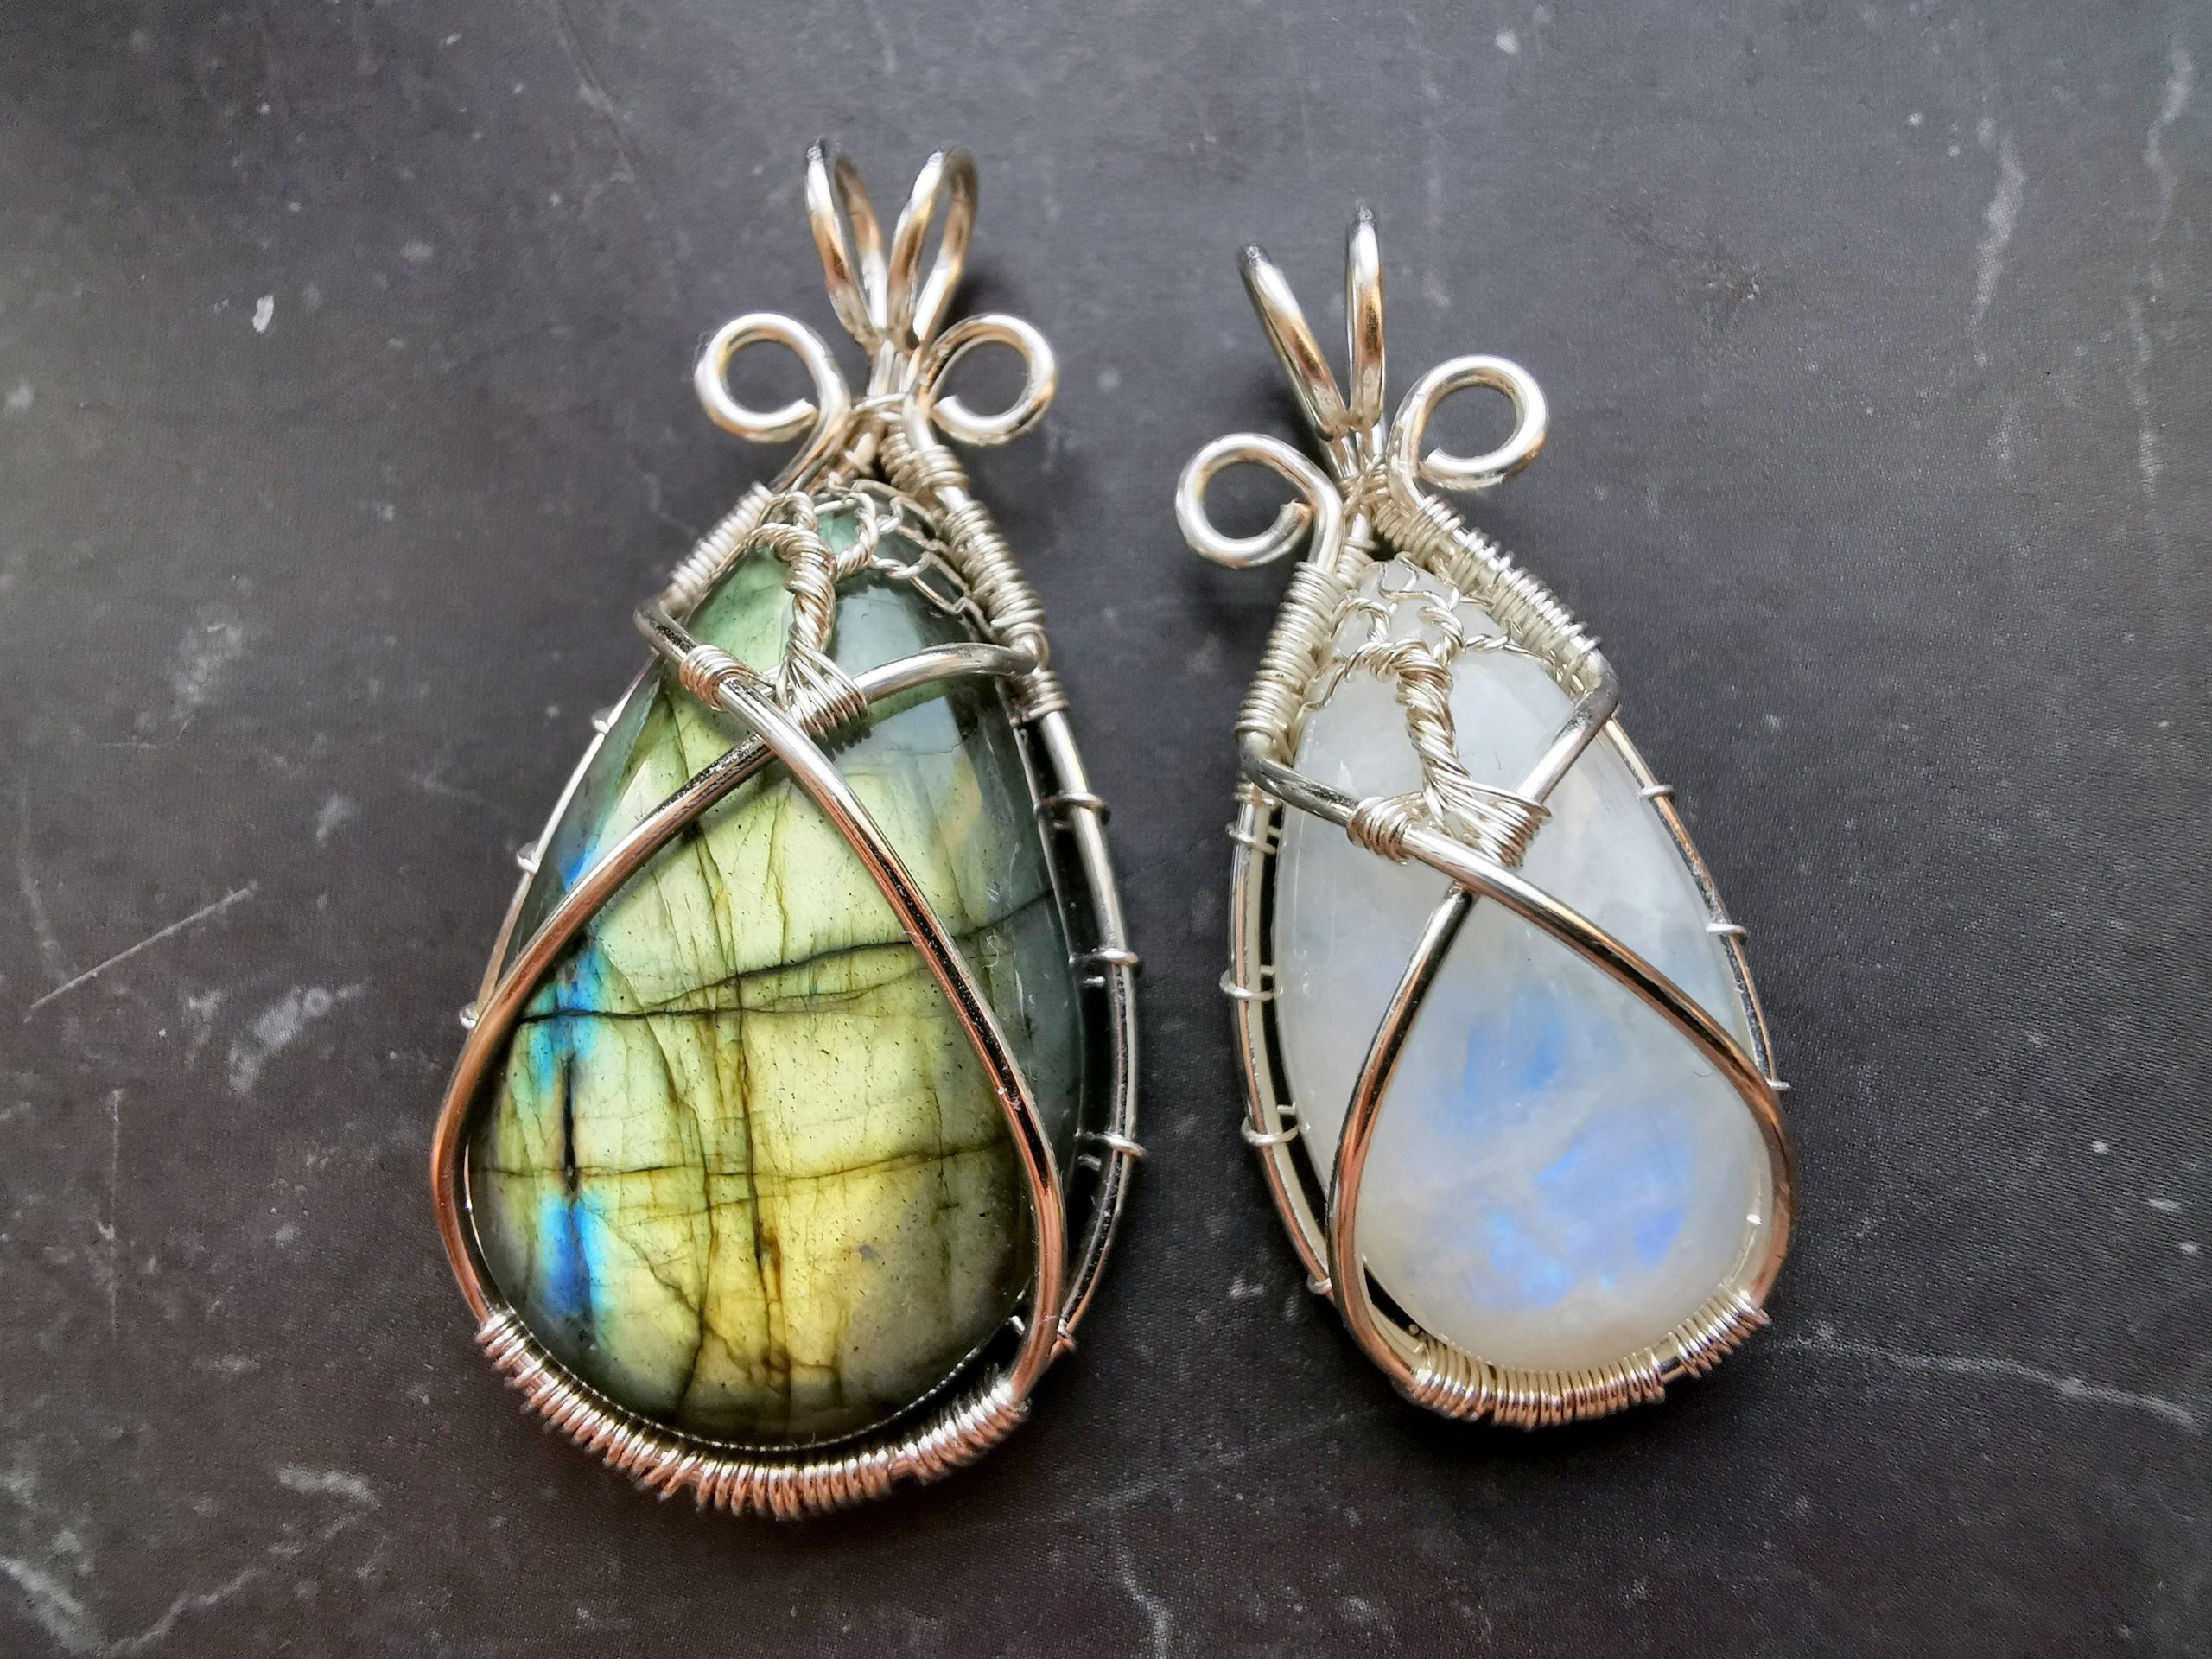 I made a pair of tree pendants, one with a moonstone, and one with a labradorite.